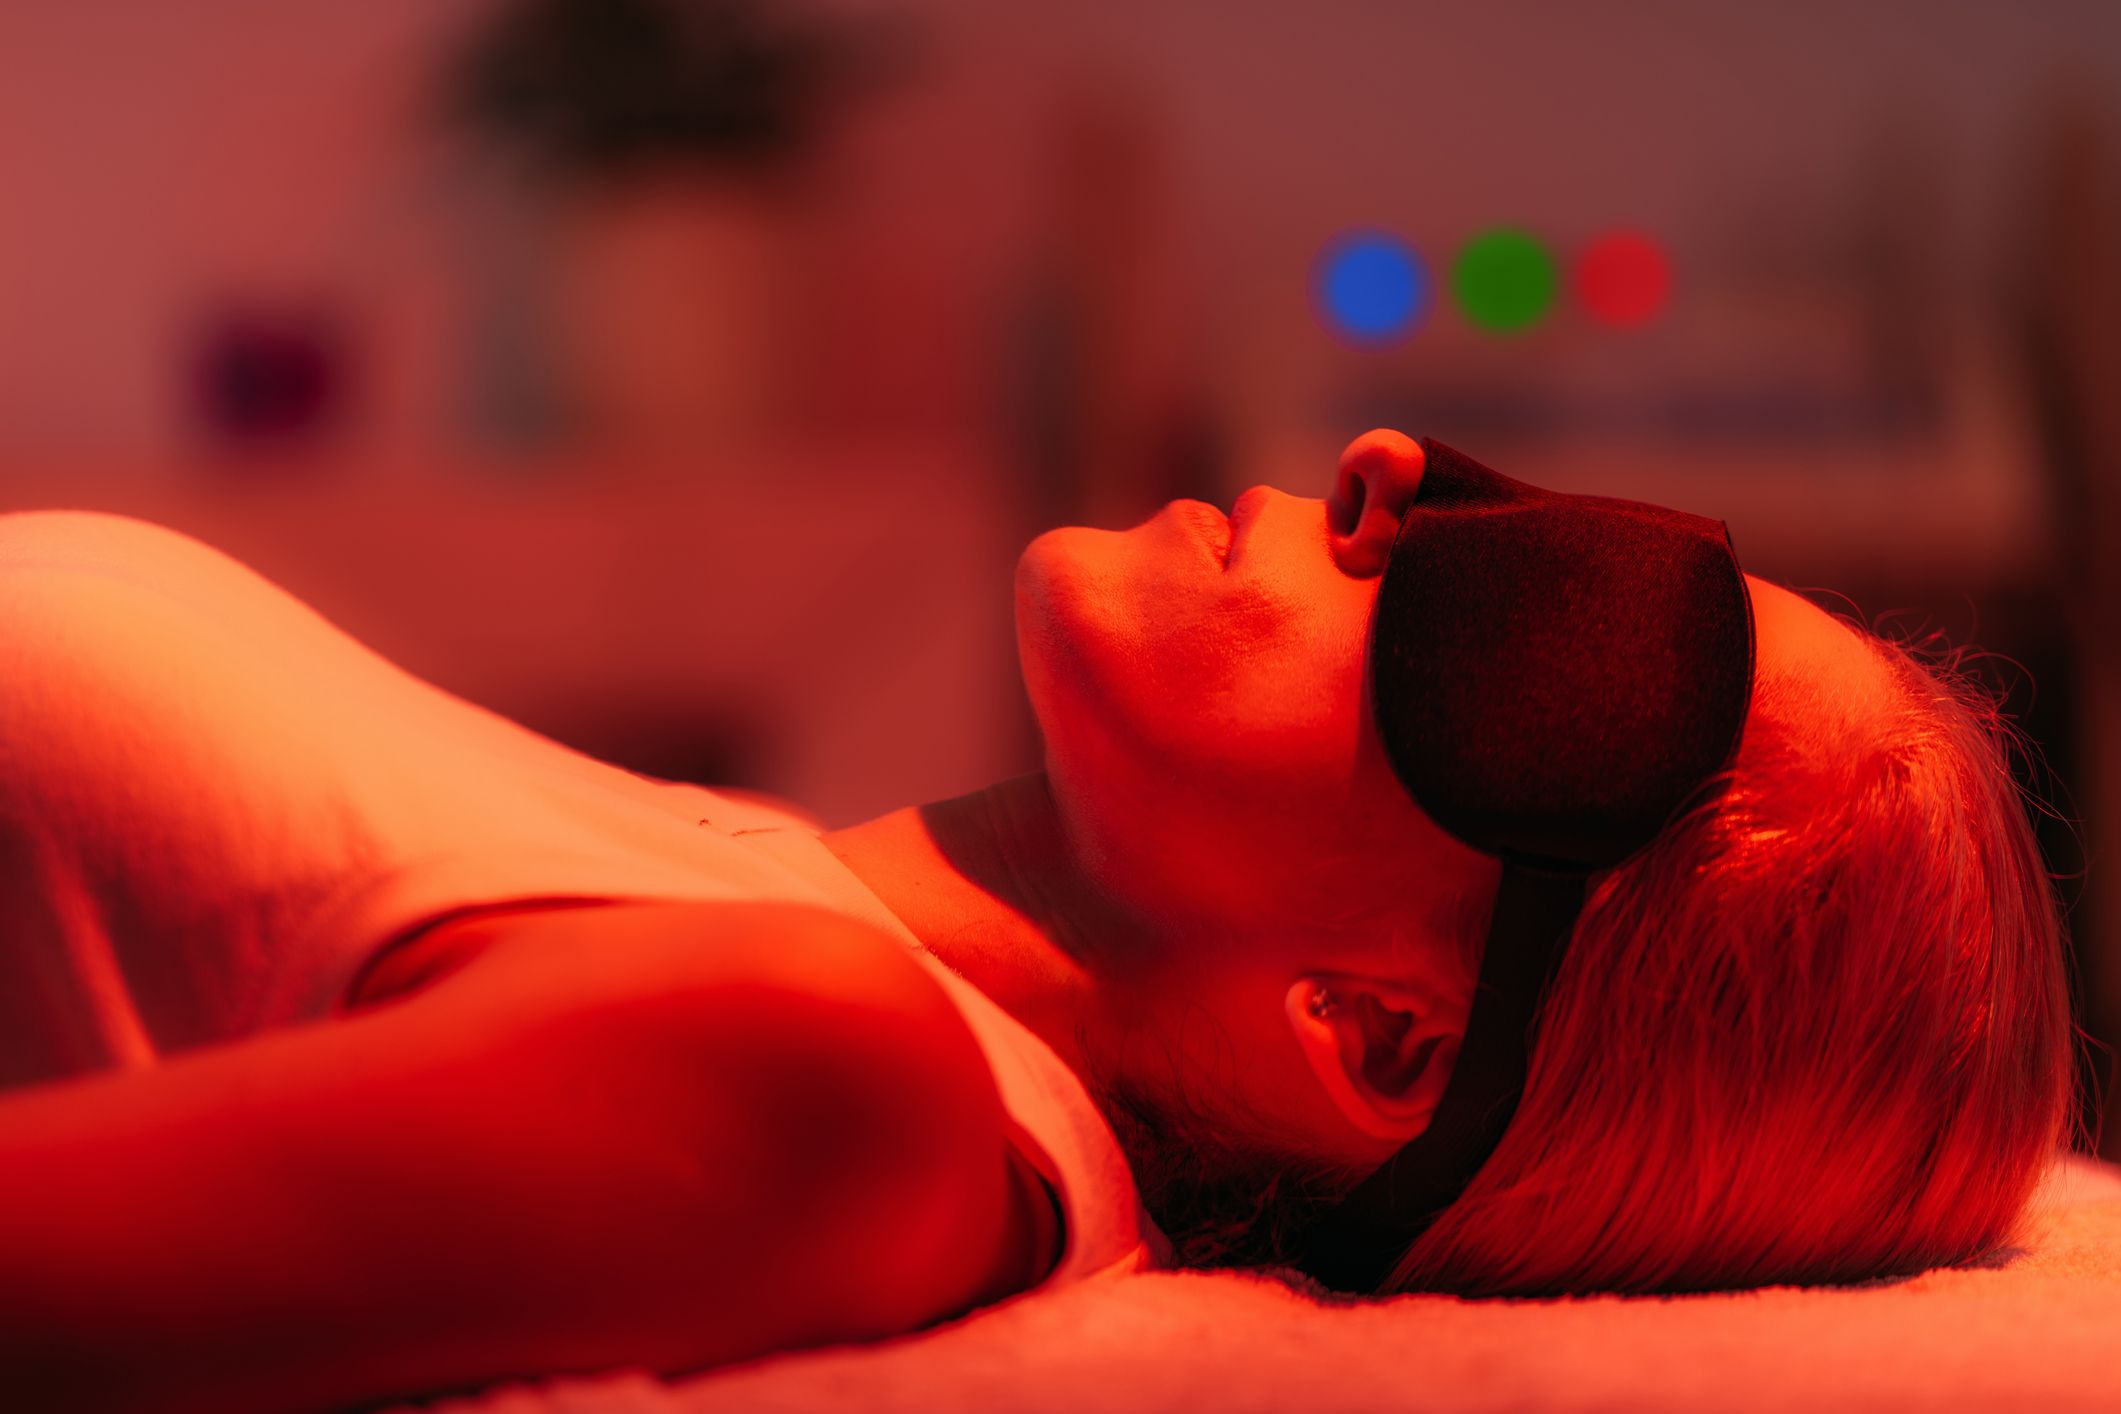 https://hips.hearstapps.com/hmg-prod/images/chroma-therapy-red-light-therapy-session-royalty-free-image-1671747791.jpg